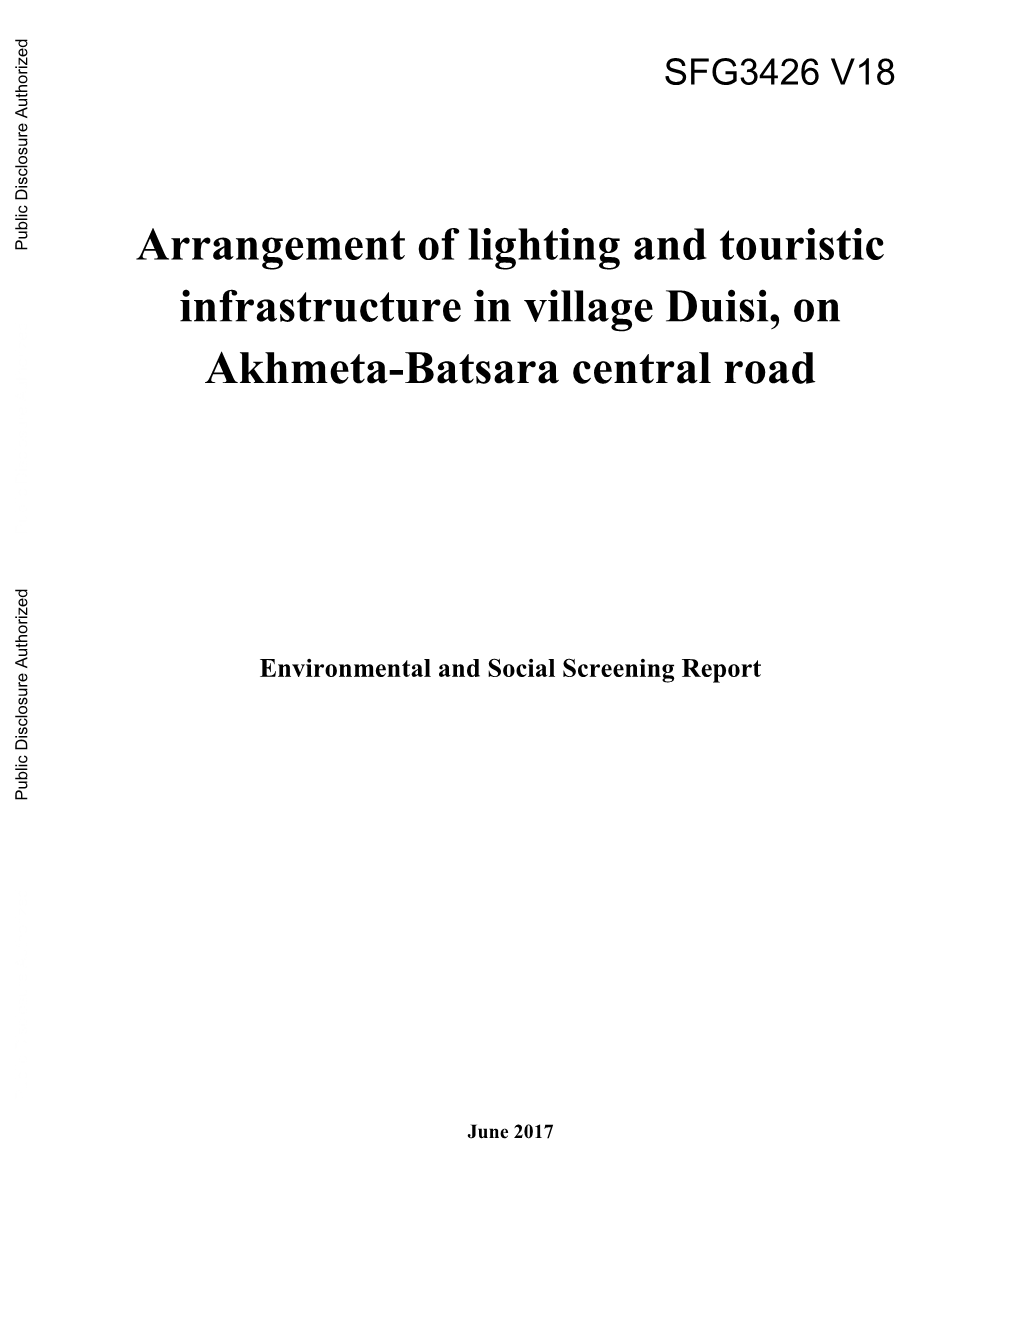 Arrangement of Lighting and Touristic Infrastructure in Village Duisi, on Akhmeta-Batsara Central Road